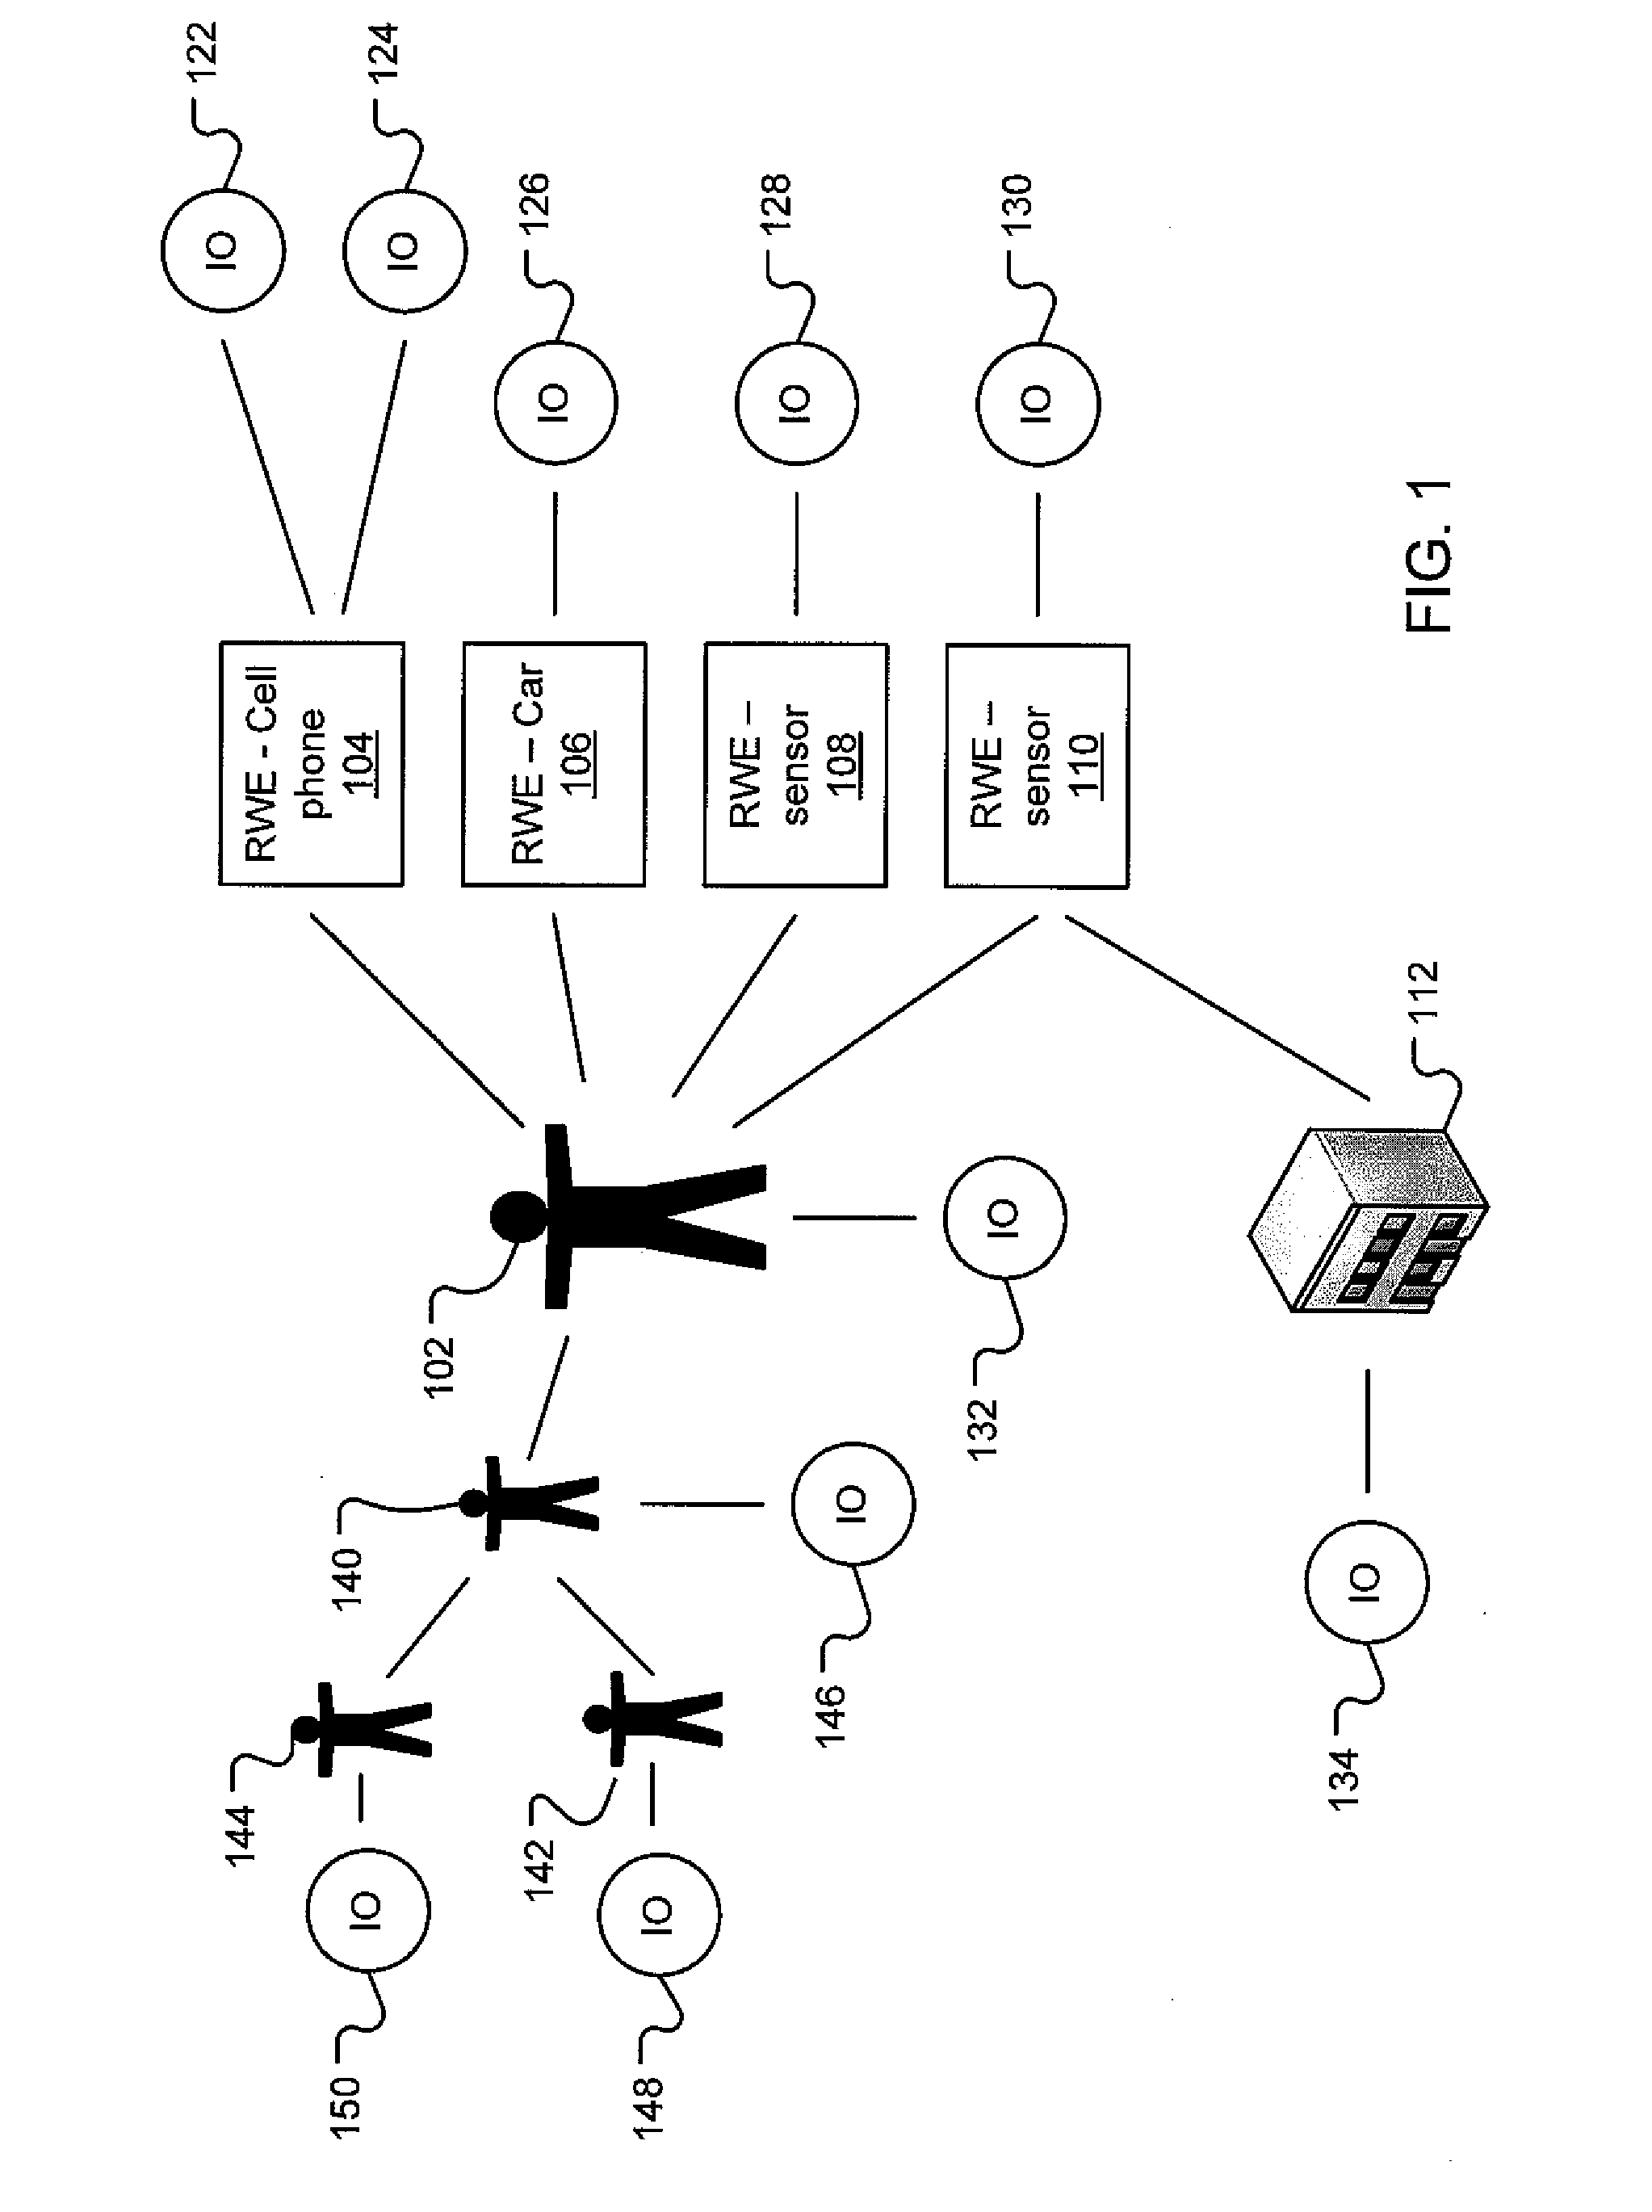 System and method for improved mapping and routing